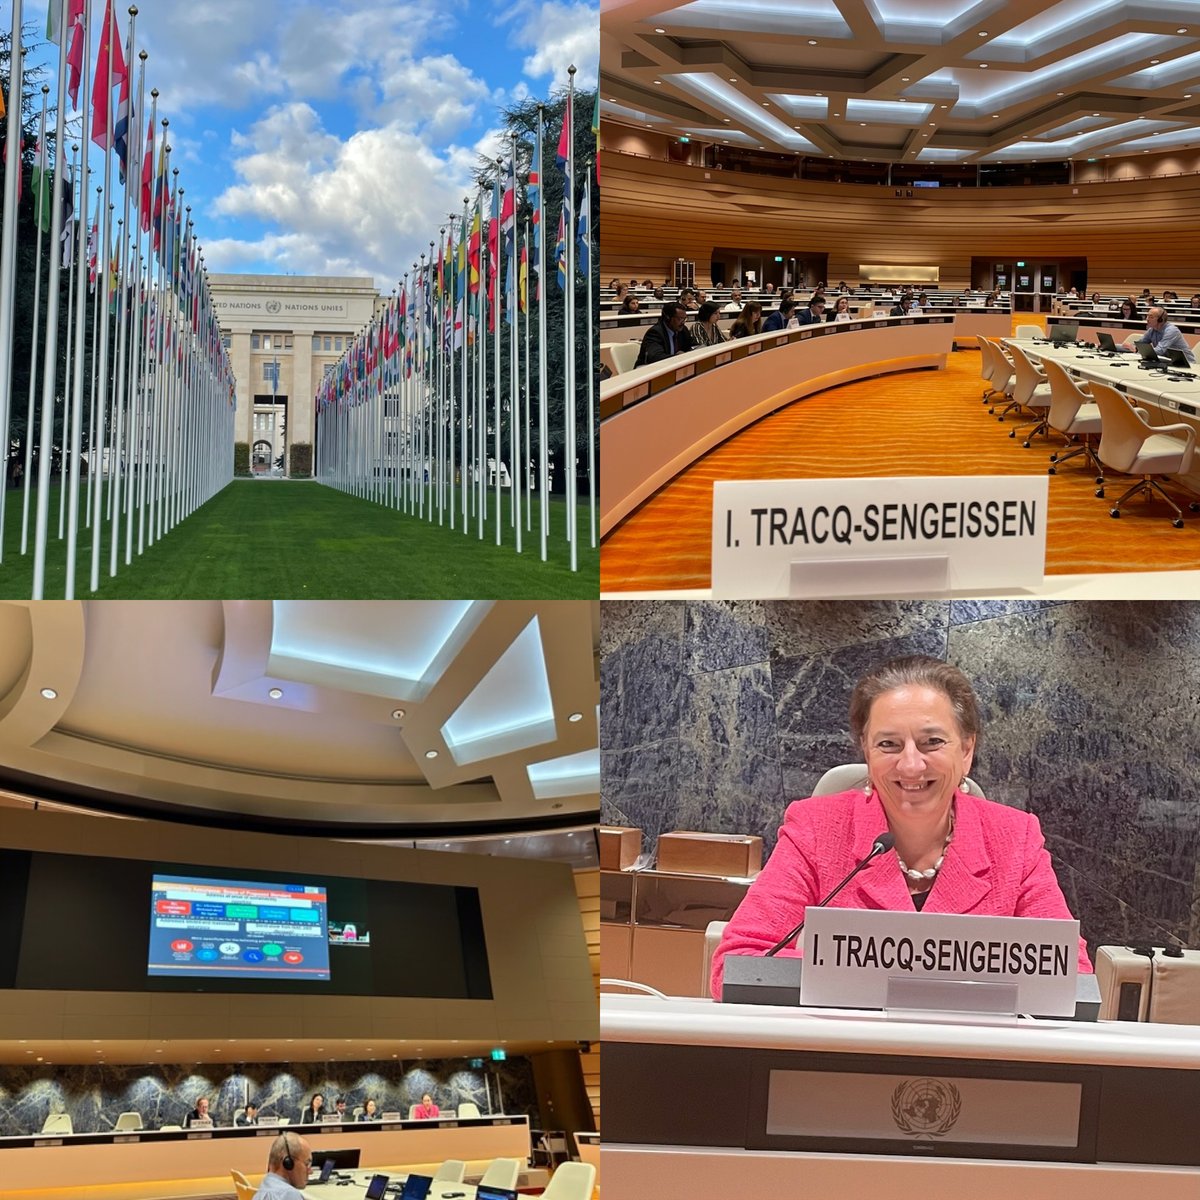 Earlier this week, IAASB member @TracqS spoke about #sustainabilityassurance on a panel at the @UNCTAD_ISAR conference. Thank you, Isabelle, for representing the IAASB and thank you, UNCTAD ISAR, for the invitation!